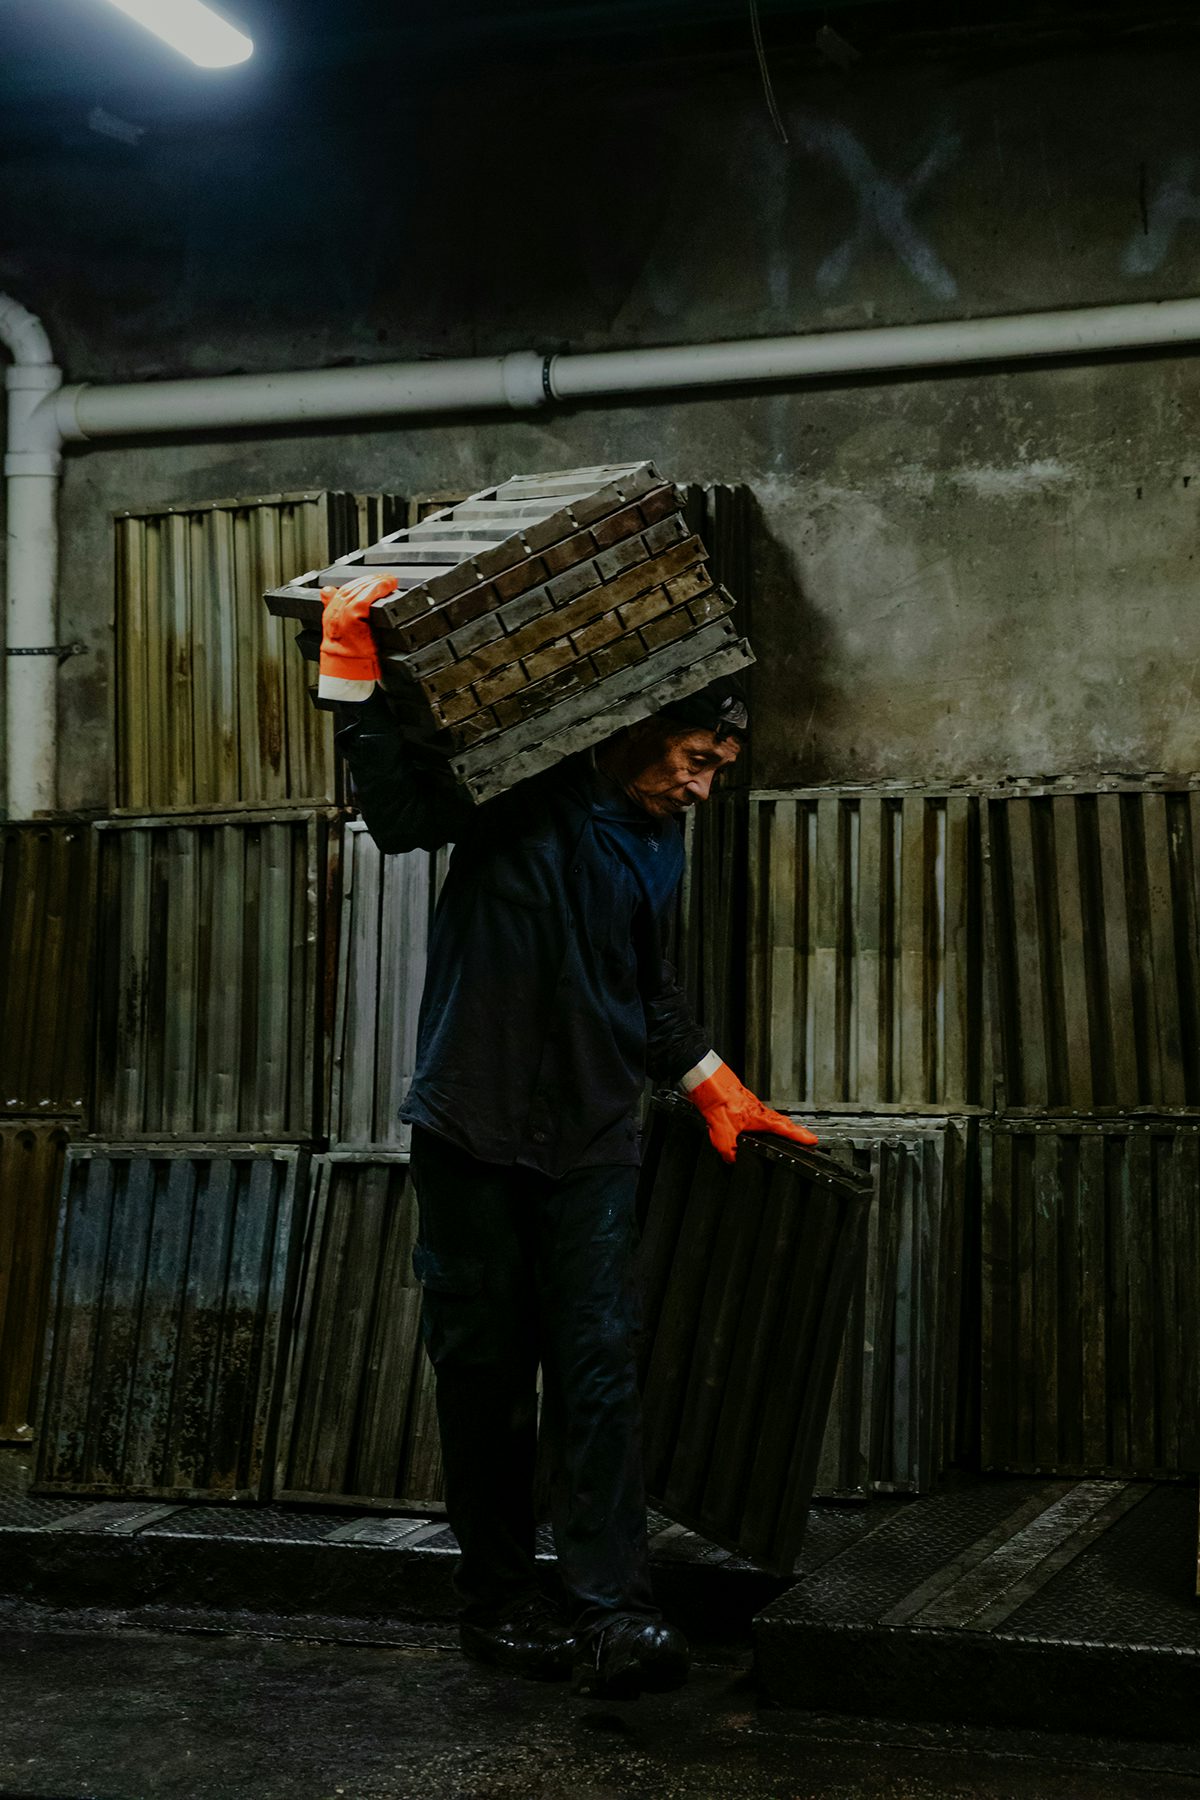 Image by Justin J Wee showing Mr Gao carrying clean oil grates at his job